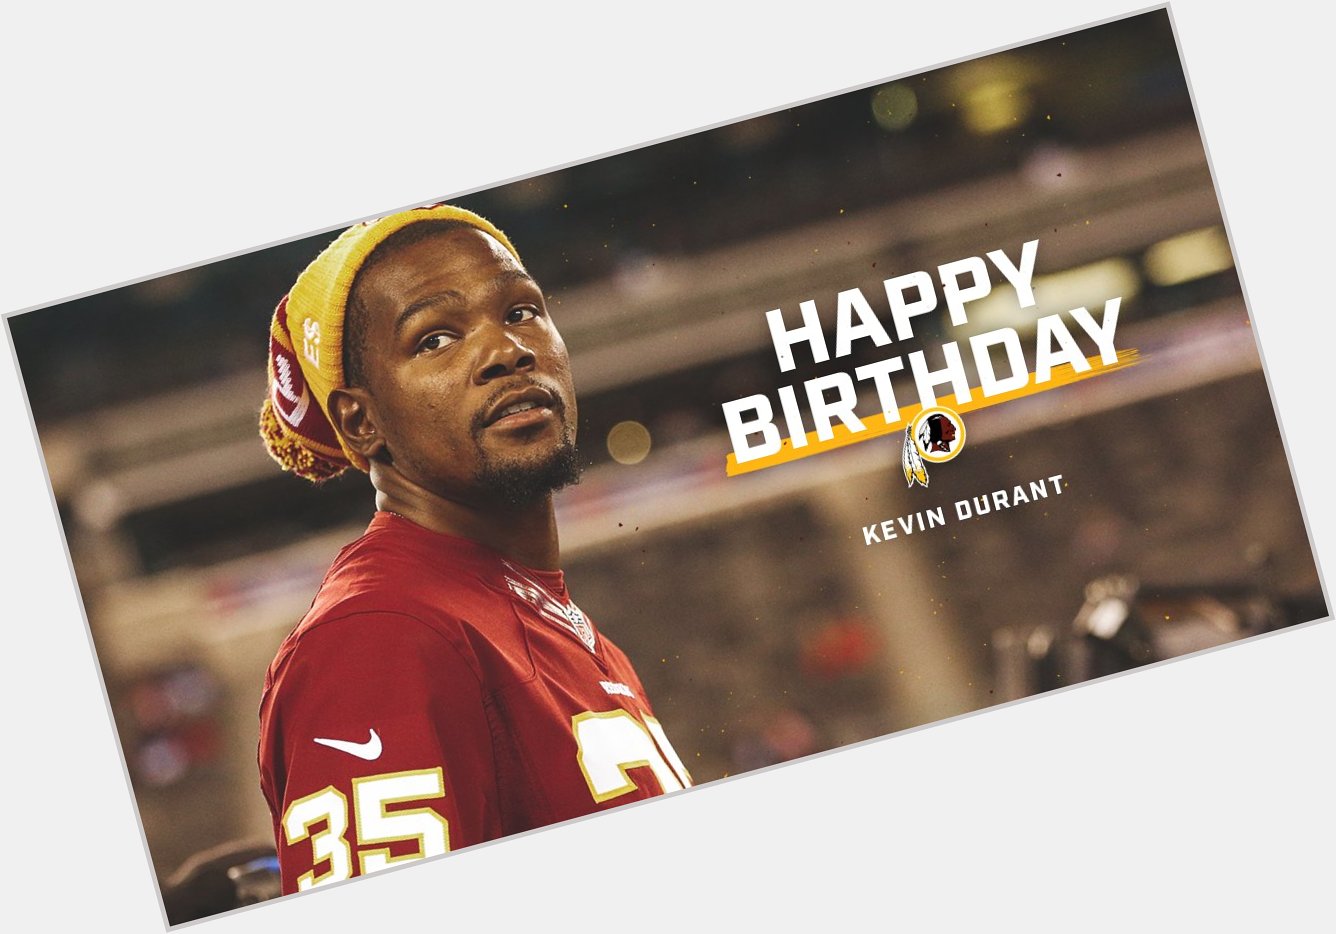 Wishing a happy birthday to SF & fan Kevin Durant! 